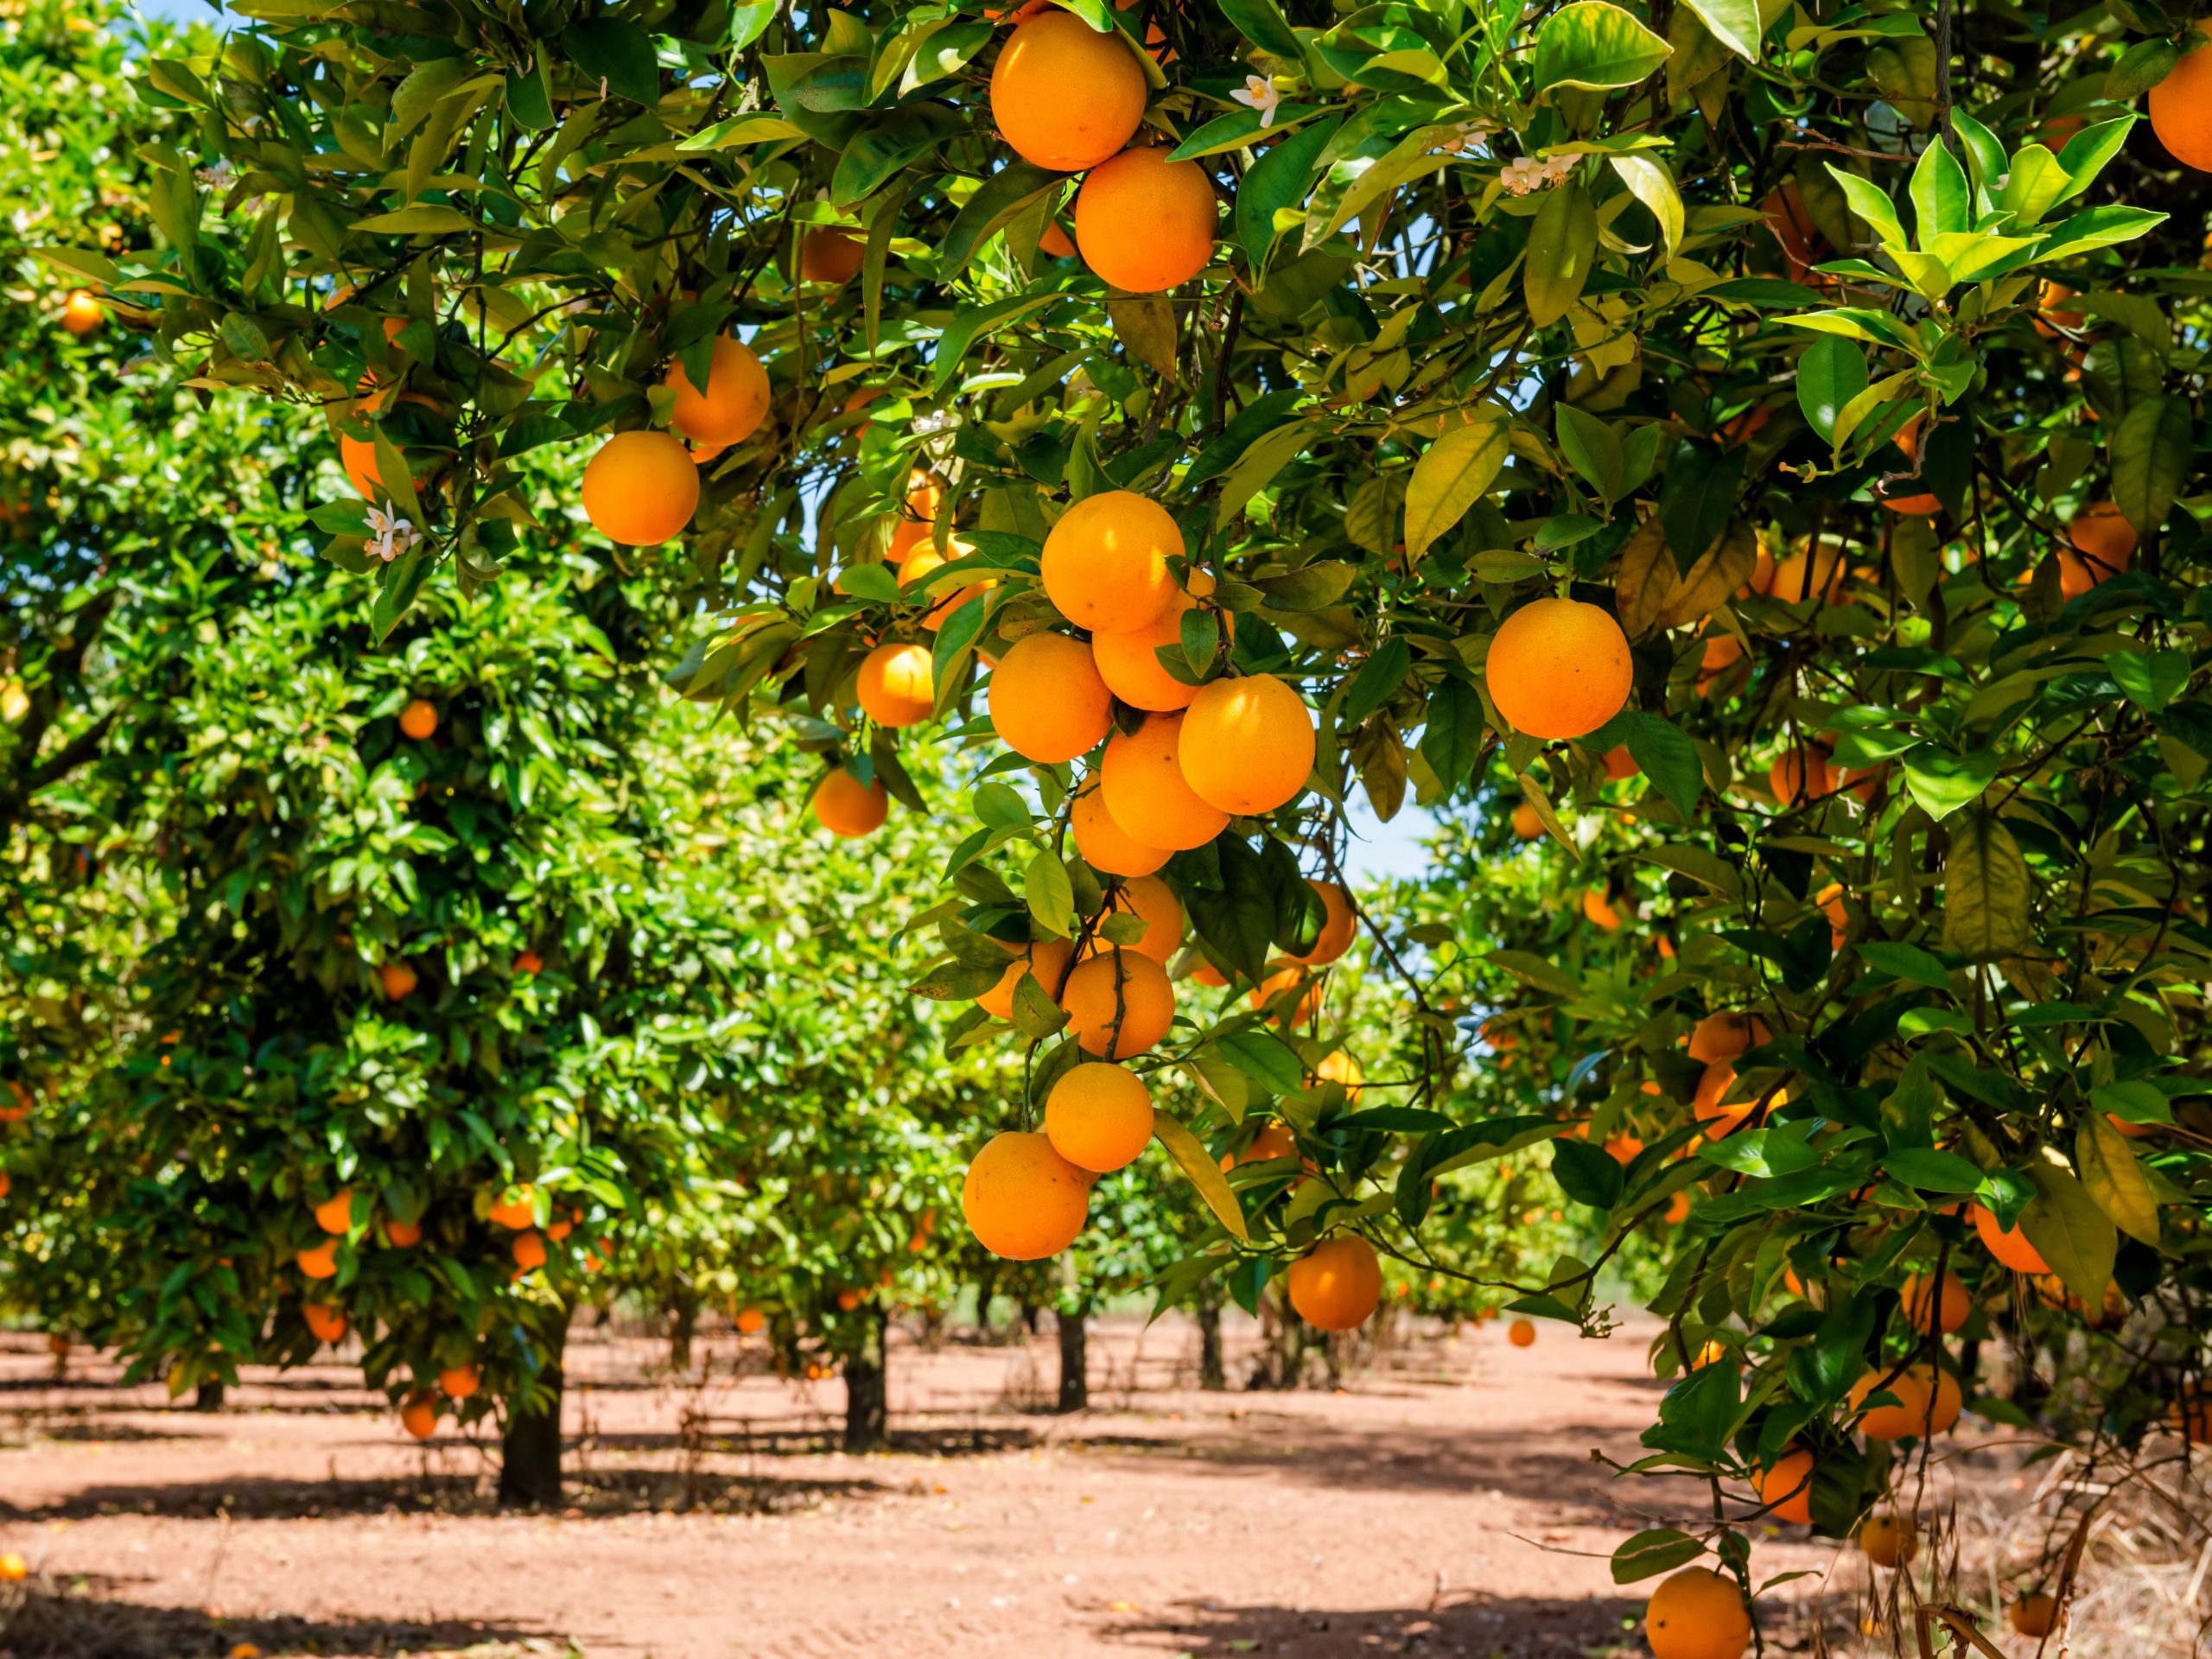 CRC industry partner Costa Group has diversified its business further by acquiring Queensland citrus-growing company 2PH Farms.